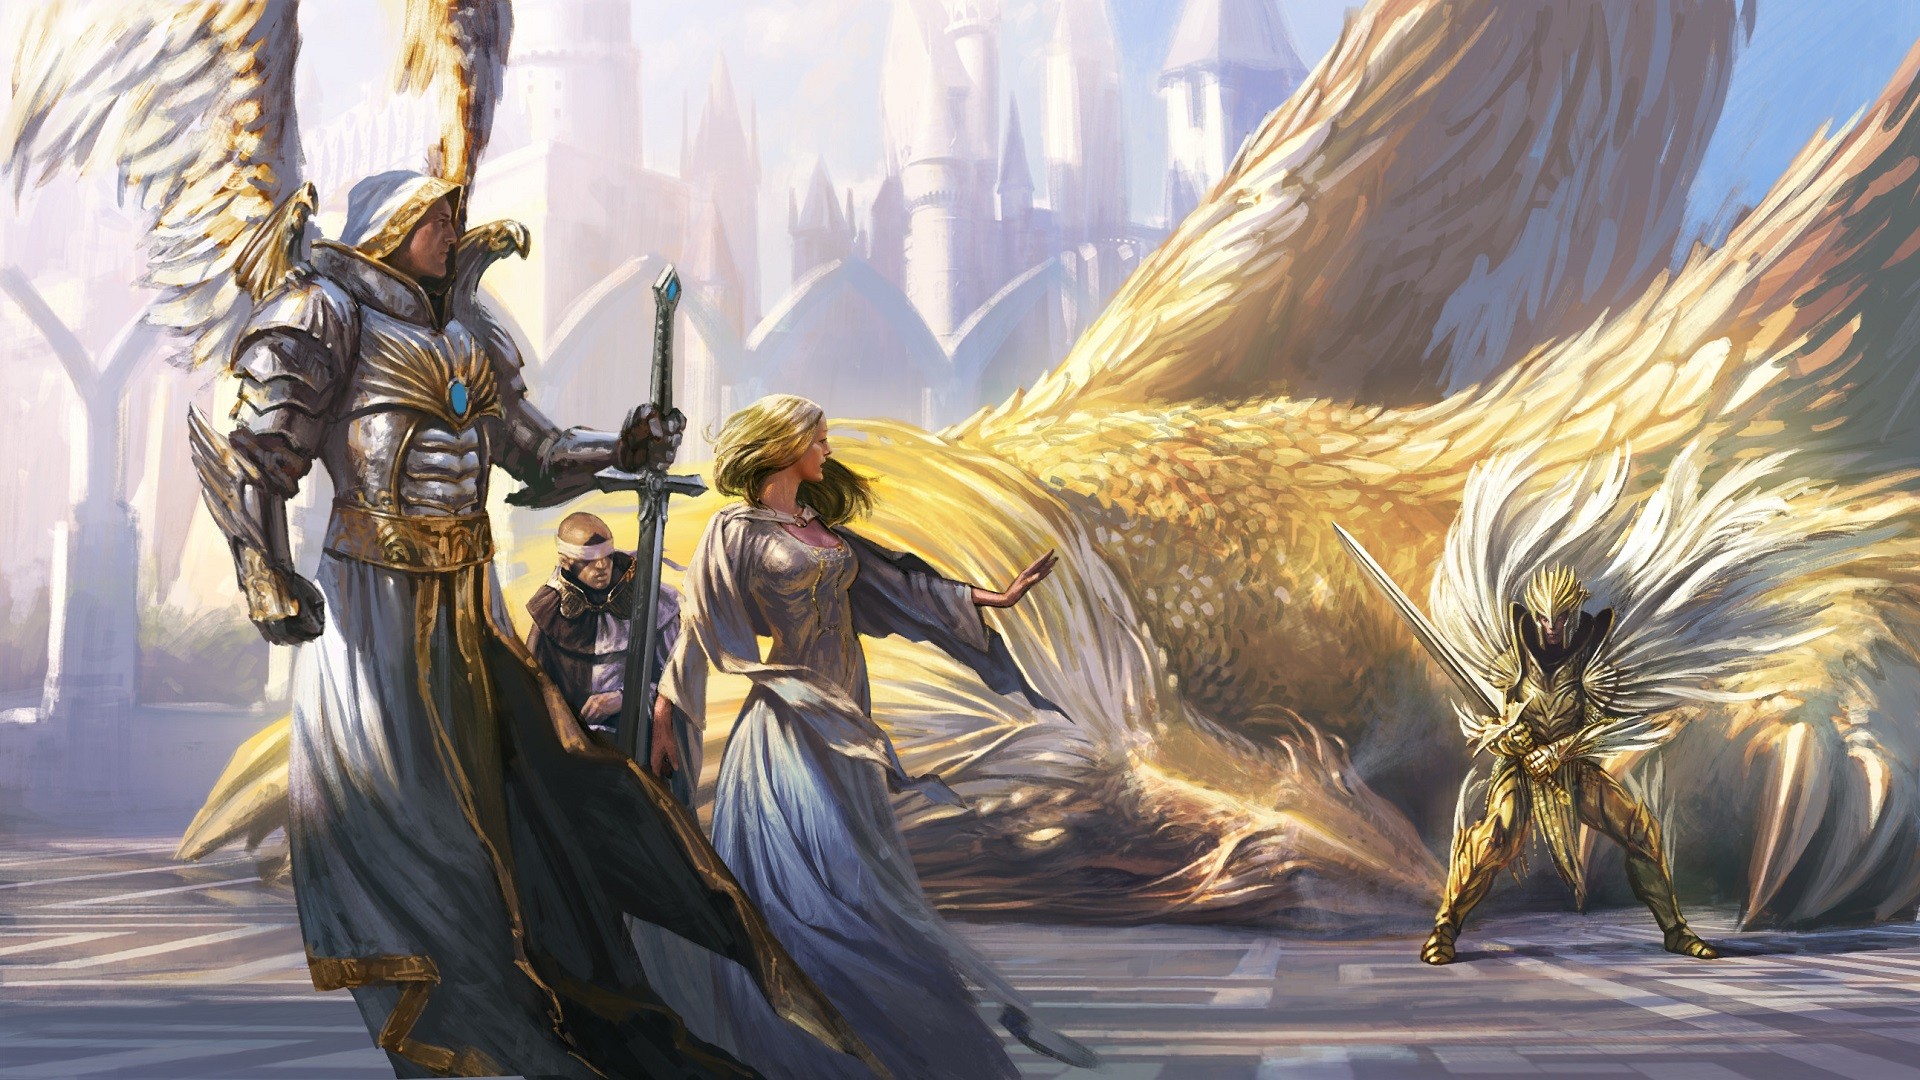 General 1920x1080 Might And Magic Heroes of Might and Magic fantasy art angel wings armor sword knight women griffins dragon PC gaming fantasy men fantasy girl video game art